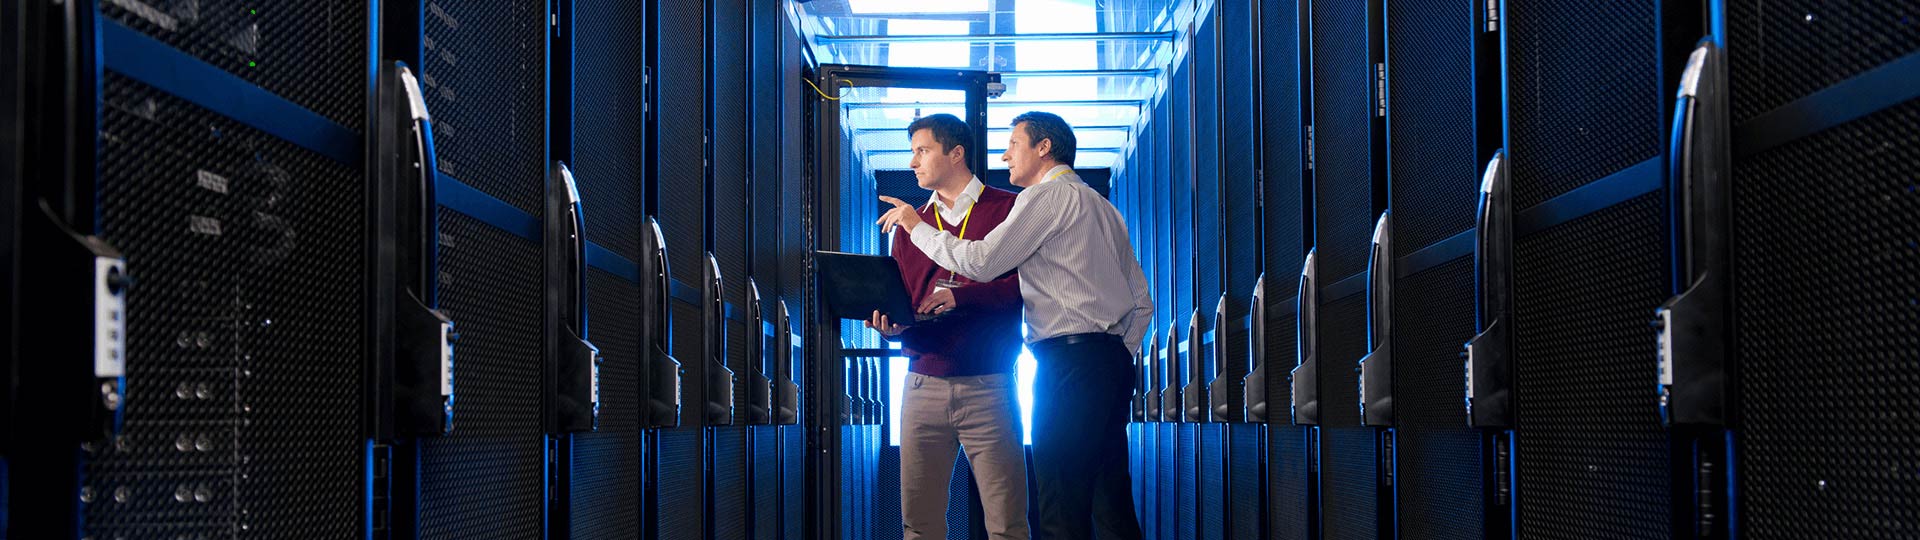 Engineers in a data center